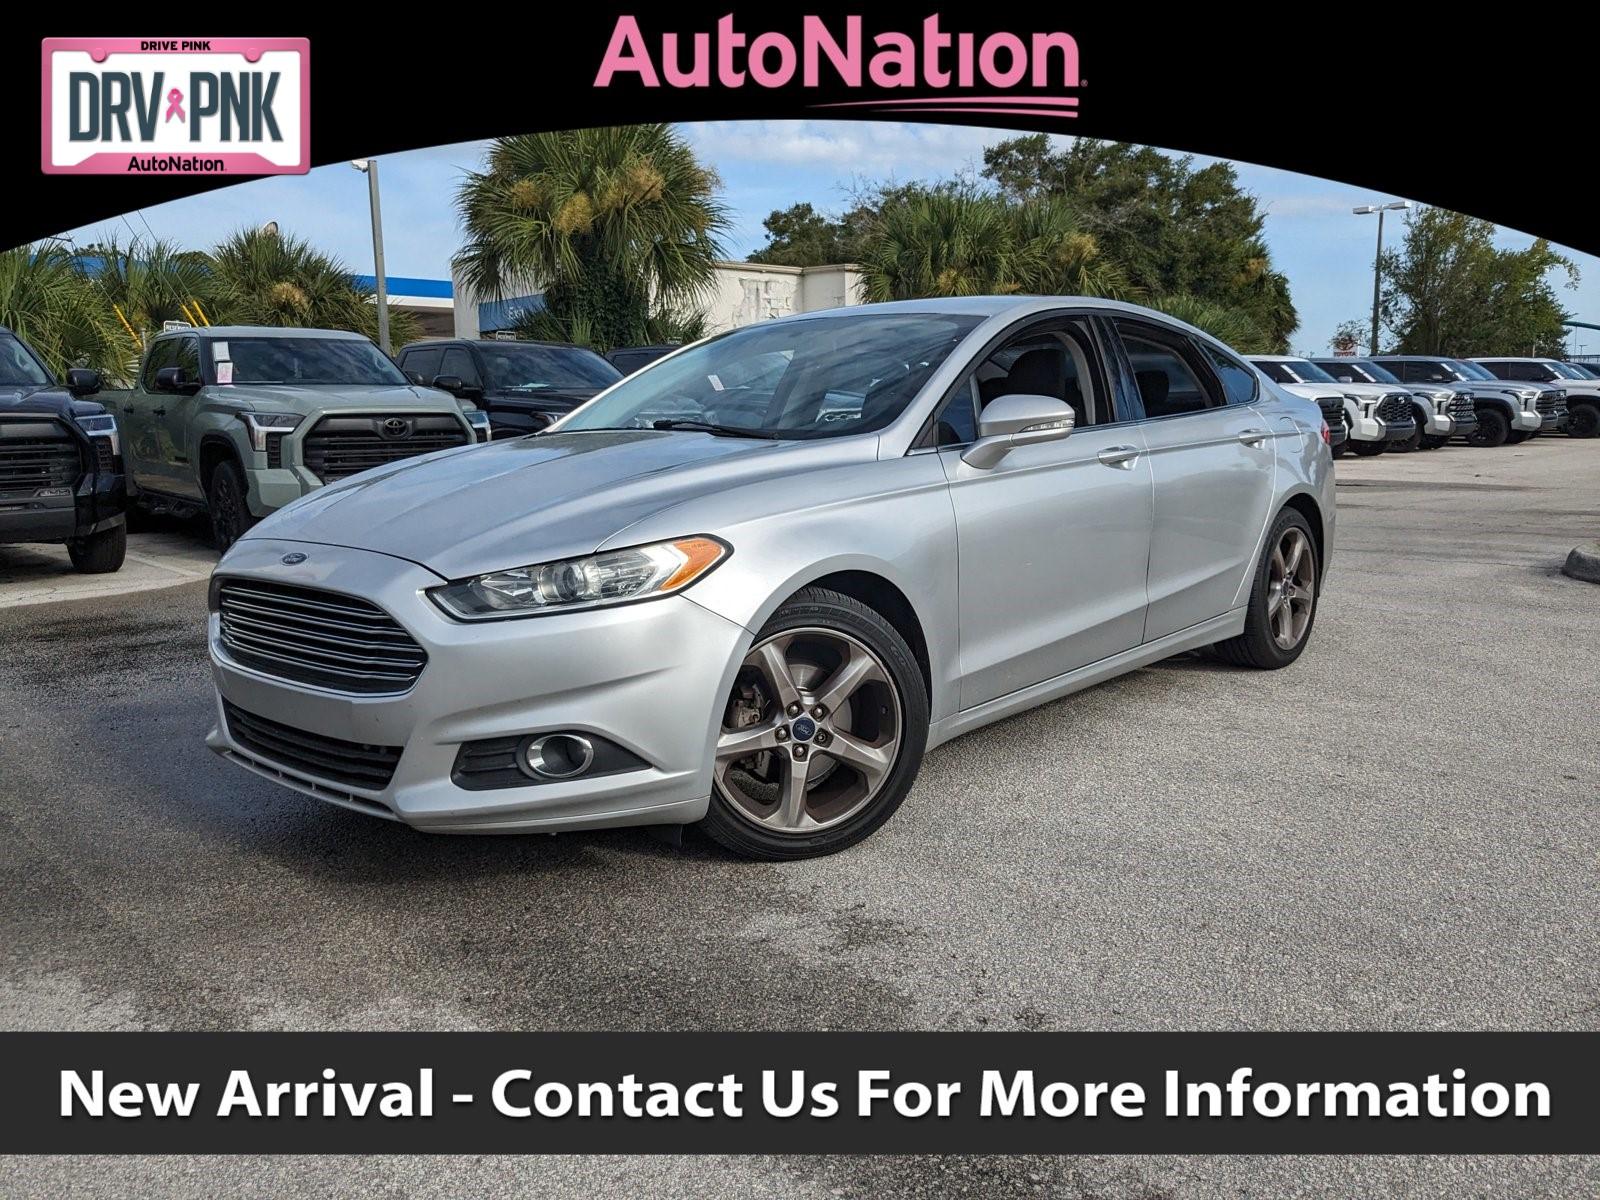 2014 Ford Fusion Vehicle Photo in Winter Park, FL 32792